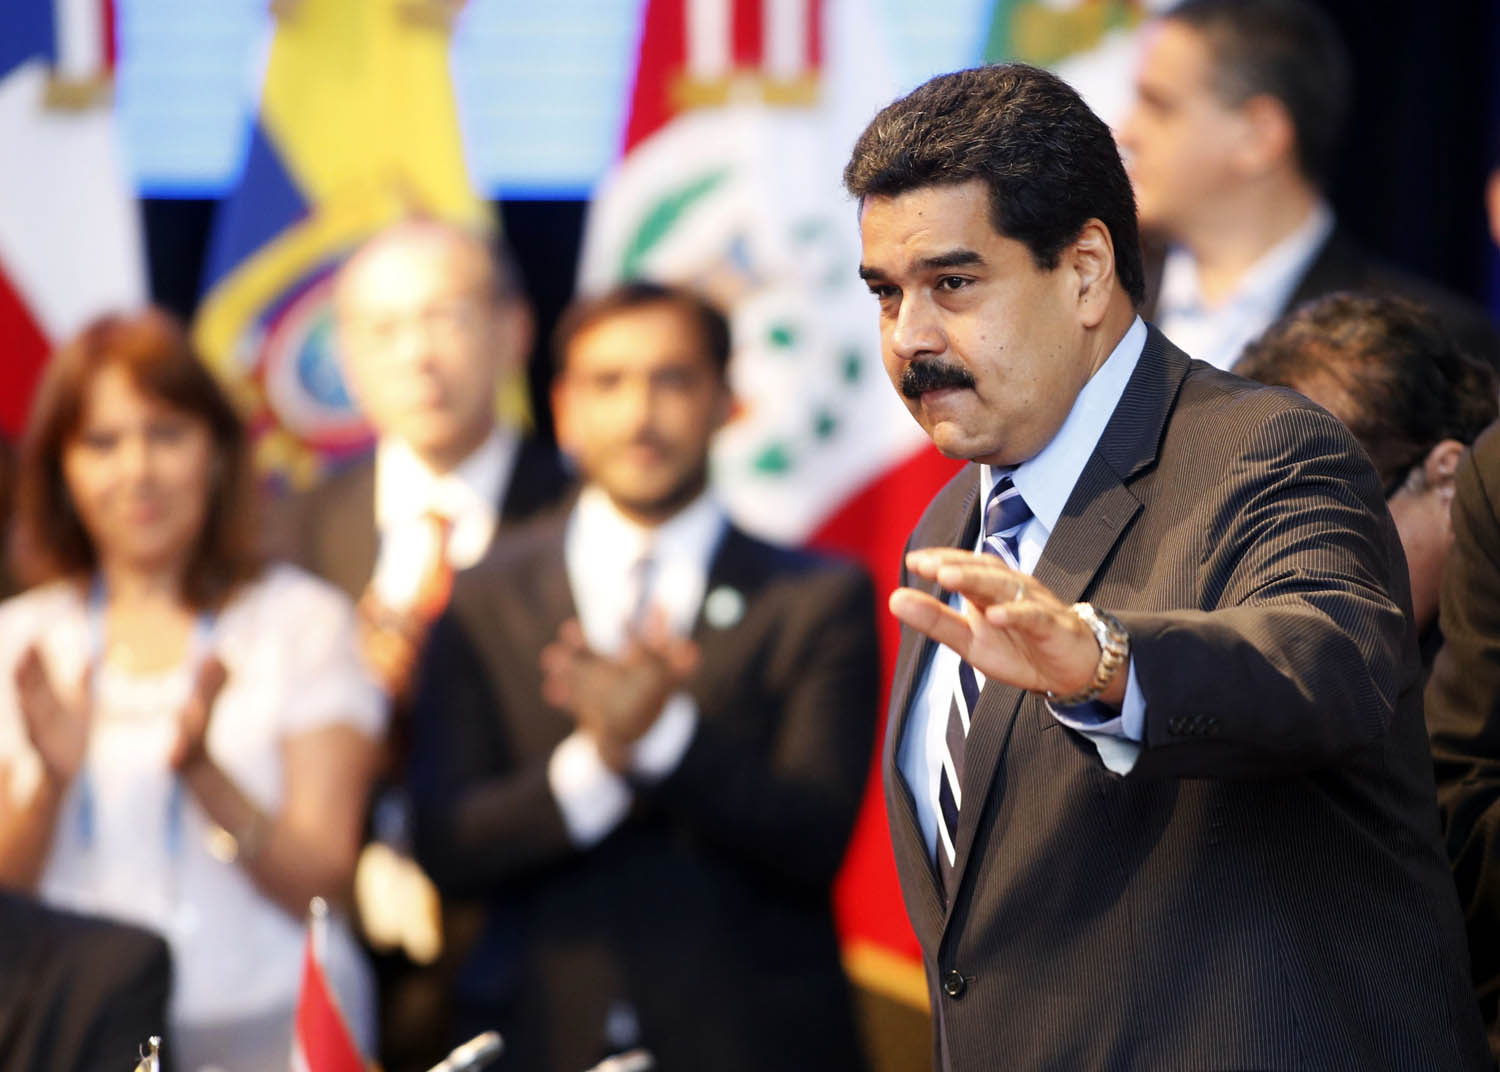 Venezuela's President Nicol&aacute;s Maduro, right, gestures during the Southern Common Market trade bloc's annual presidential 47th summit in Paran&aacute;, Argentina, on Dec. 17, 2014 (Enrique Marcarian—Reuters)